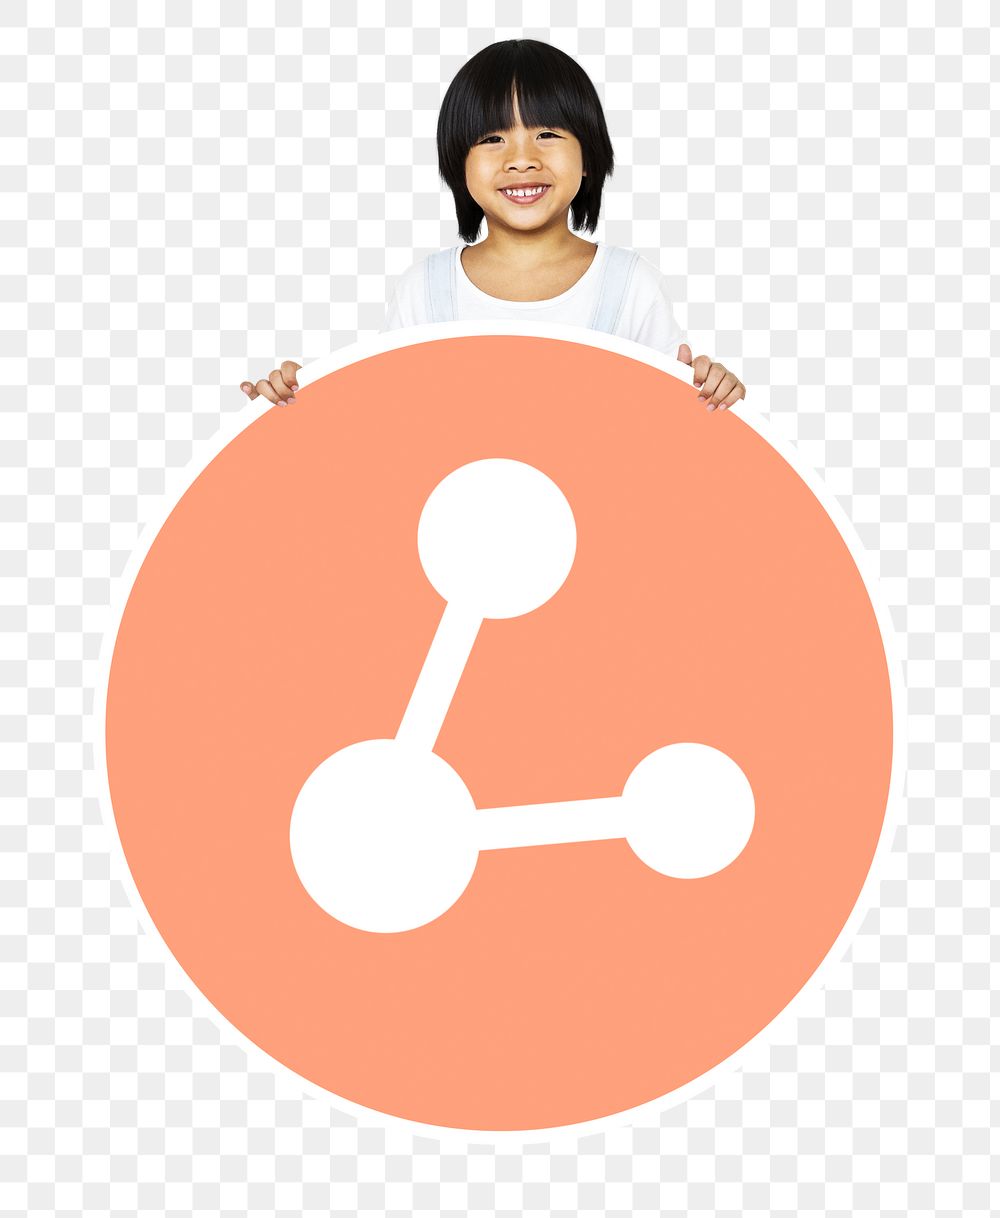 Kid with share icon png, transparent background